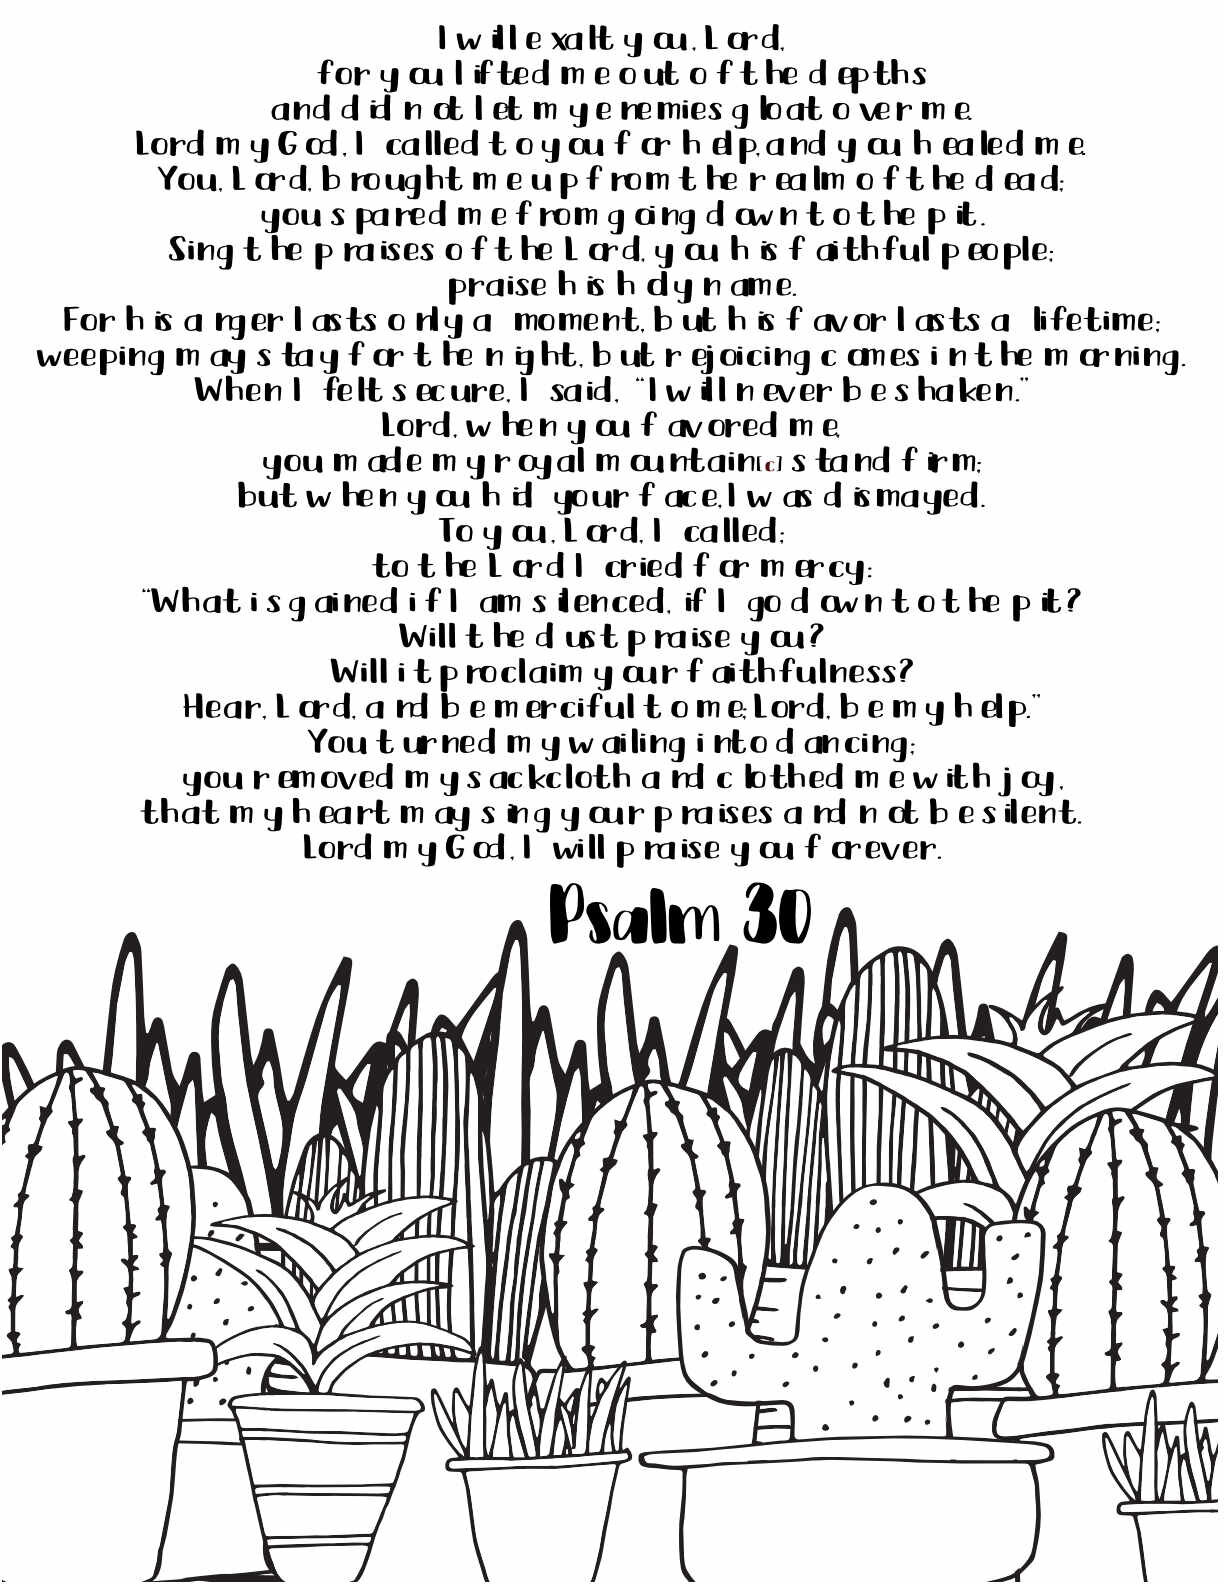 10 Free Printable Psalm Coloring Pages - Download and Color Adult Scripture - Psalm 30CLICK HERE TO DOWNLOAD THIS PAGE FREE